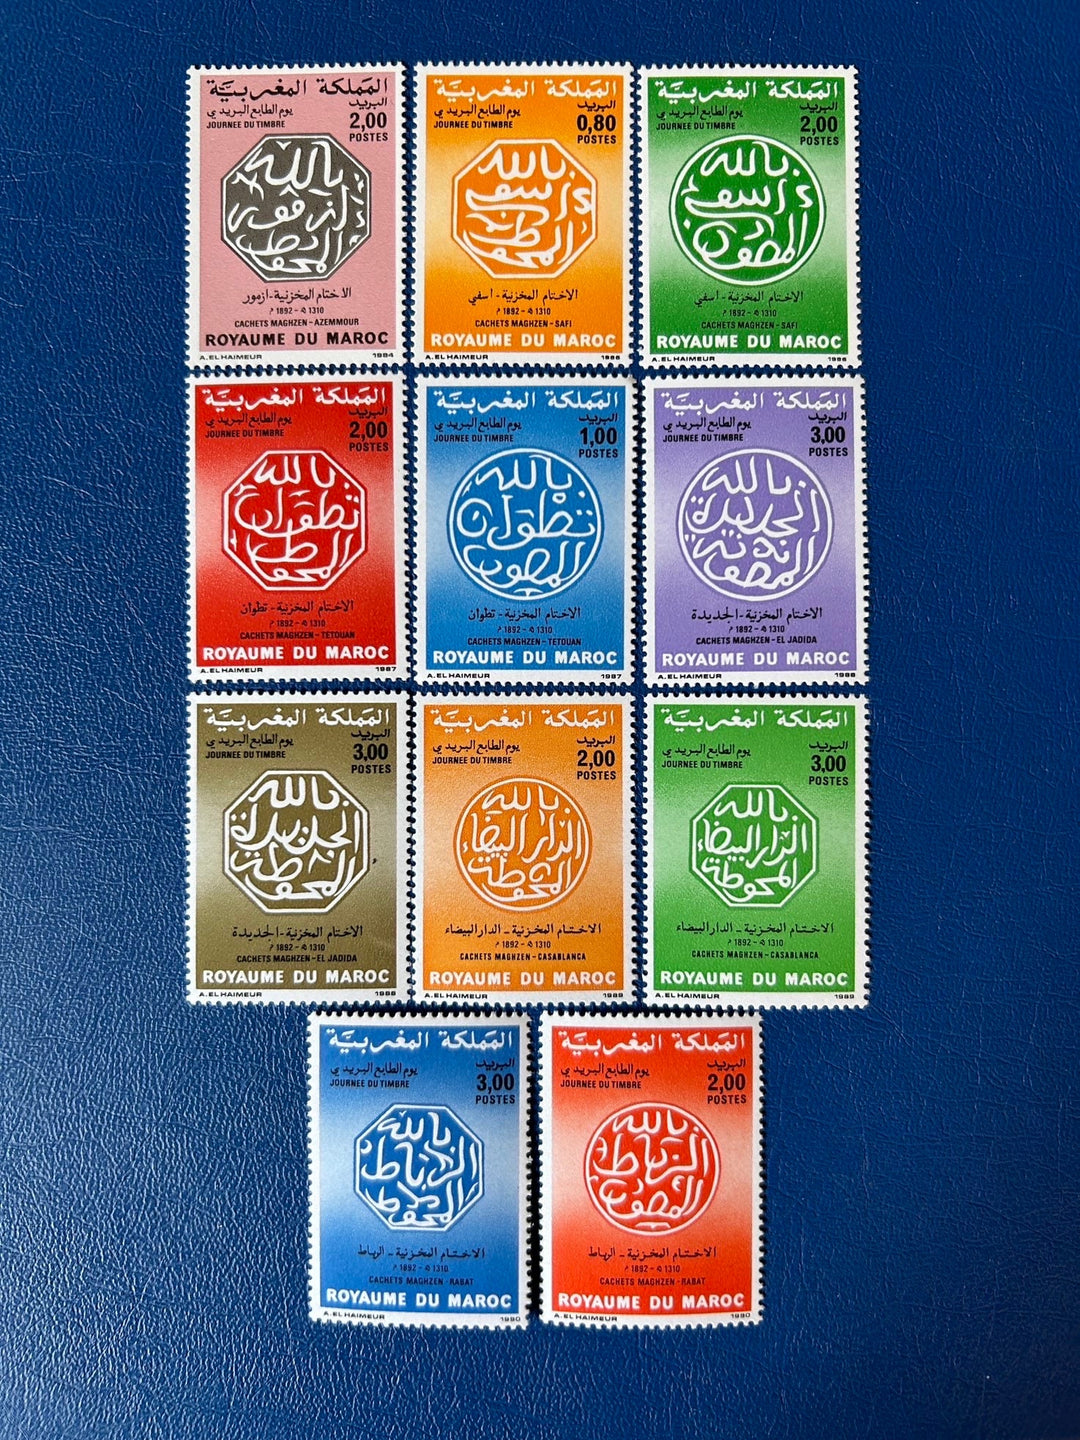 Morocco - Original Vintage Postage Stamps- 1984-90 - Stamp Day - for the collector or crafter